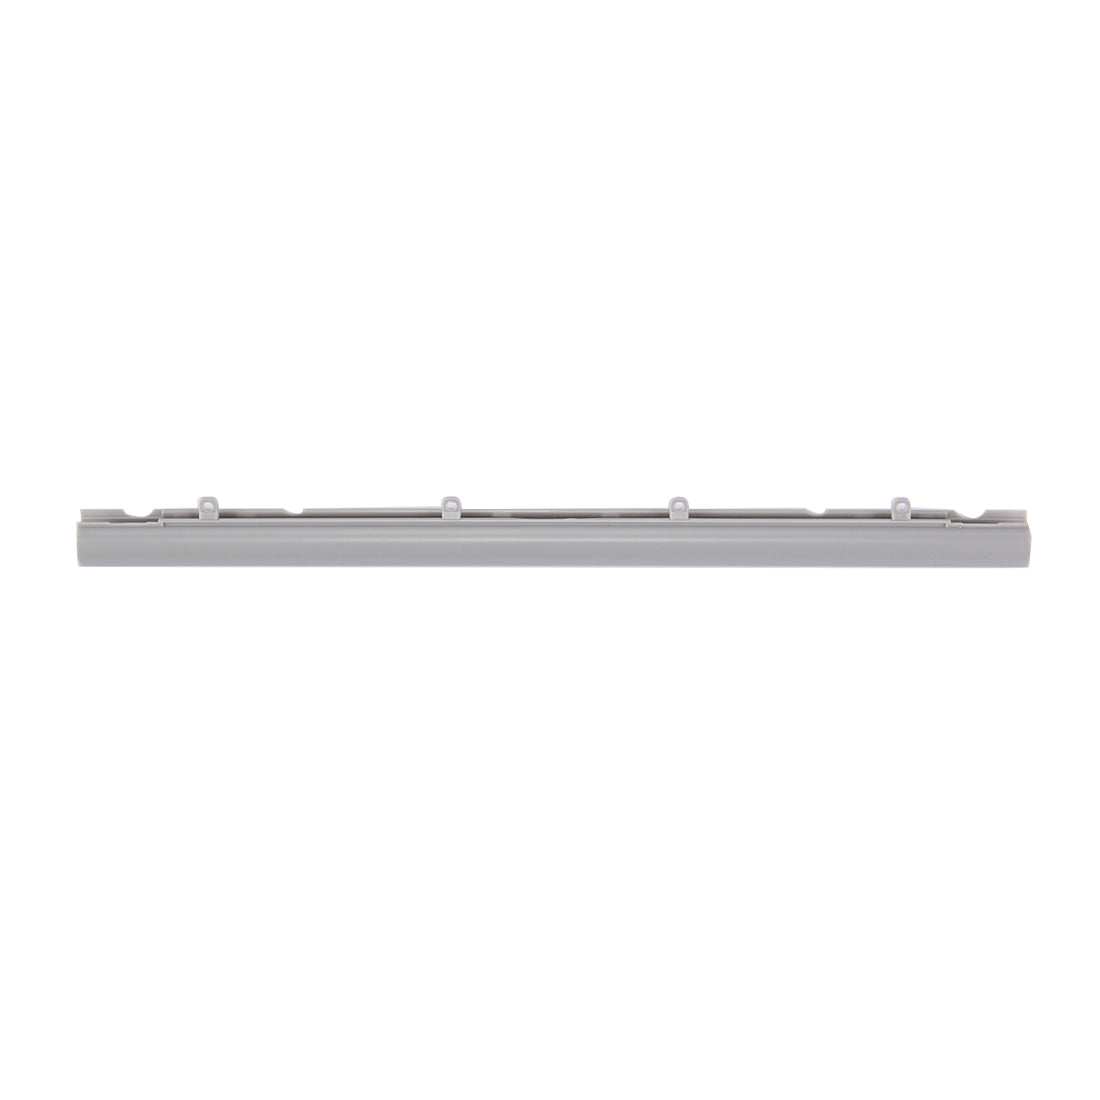 Spindle Cover Apple MacBook Air 13.3 A1237 A1304 2008 2009